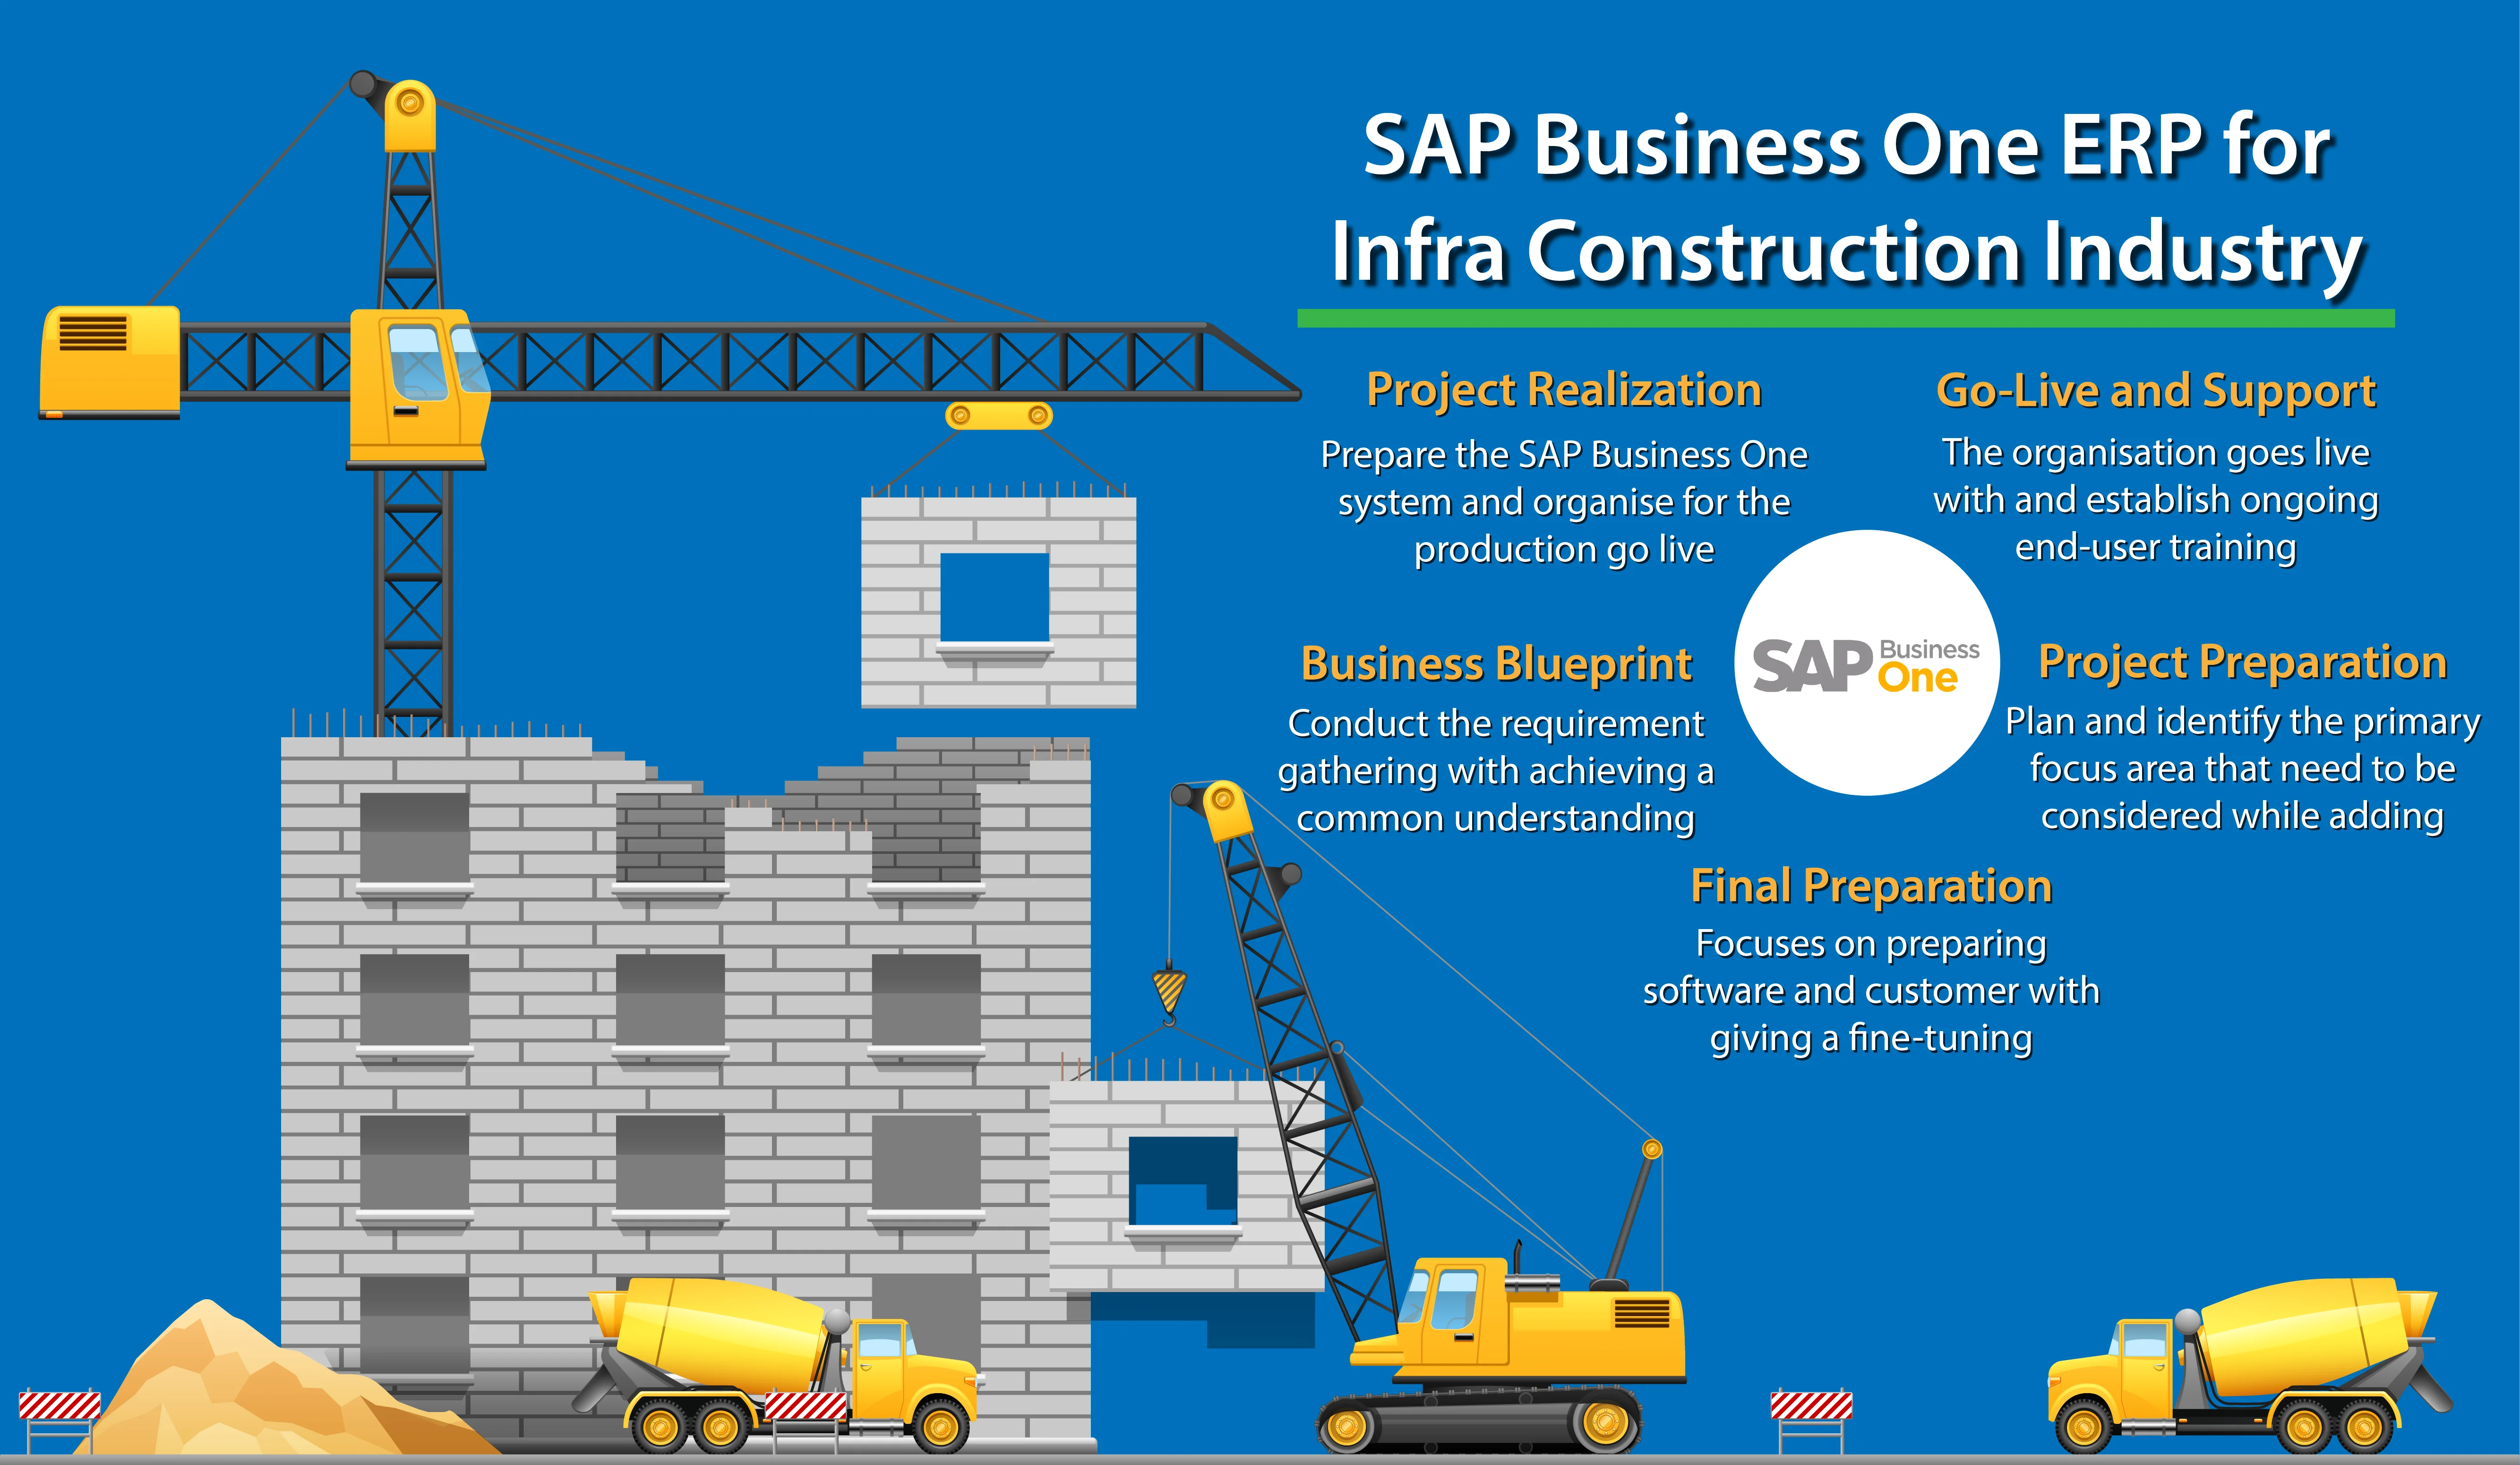 SAP Business One ERP for Infra Construction industry